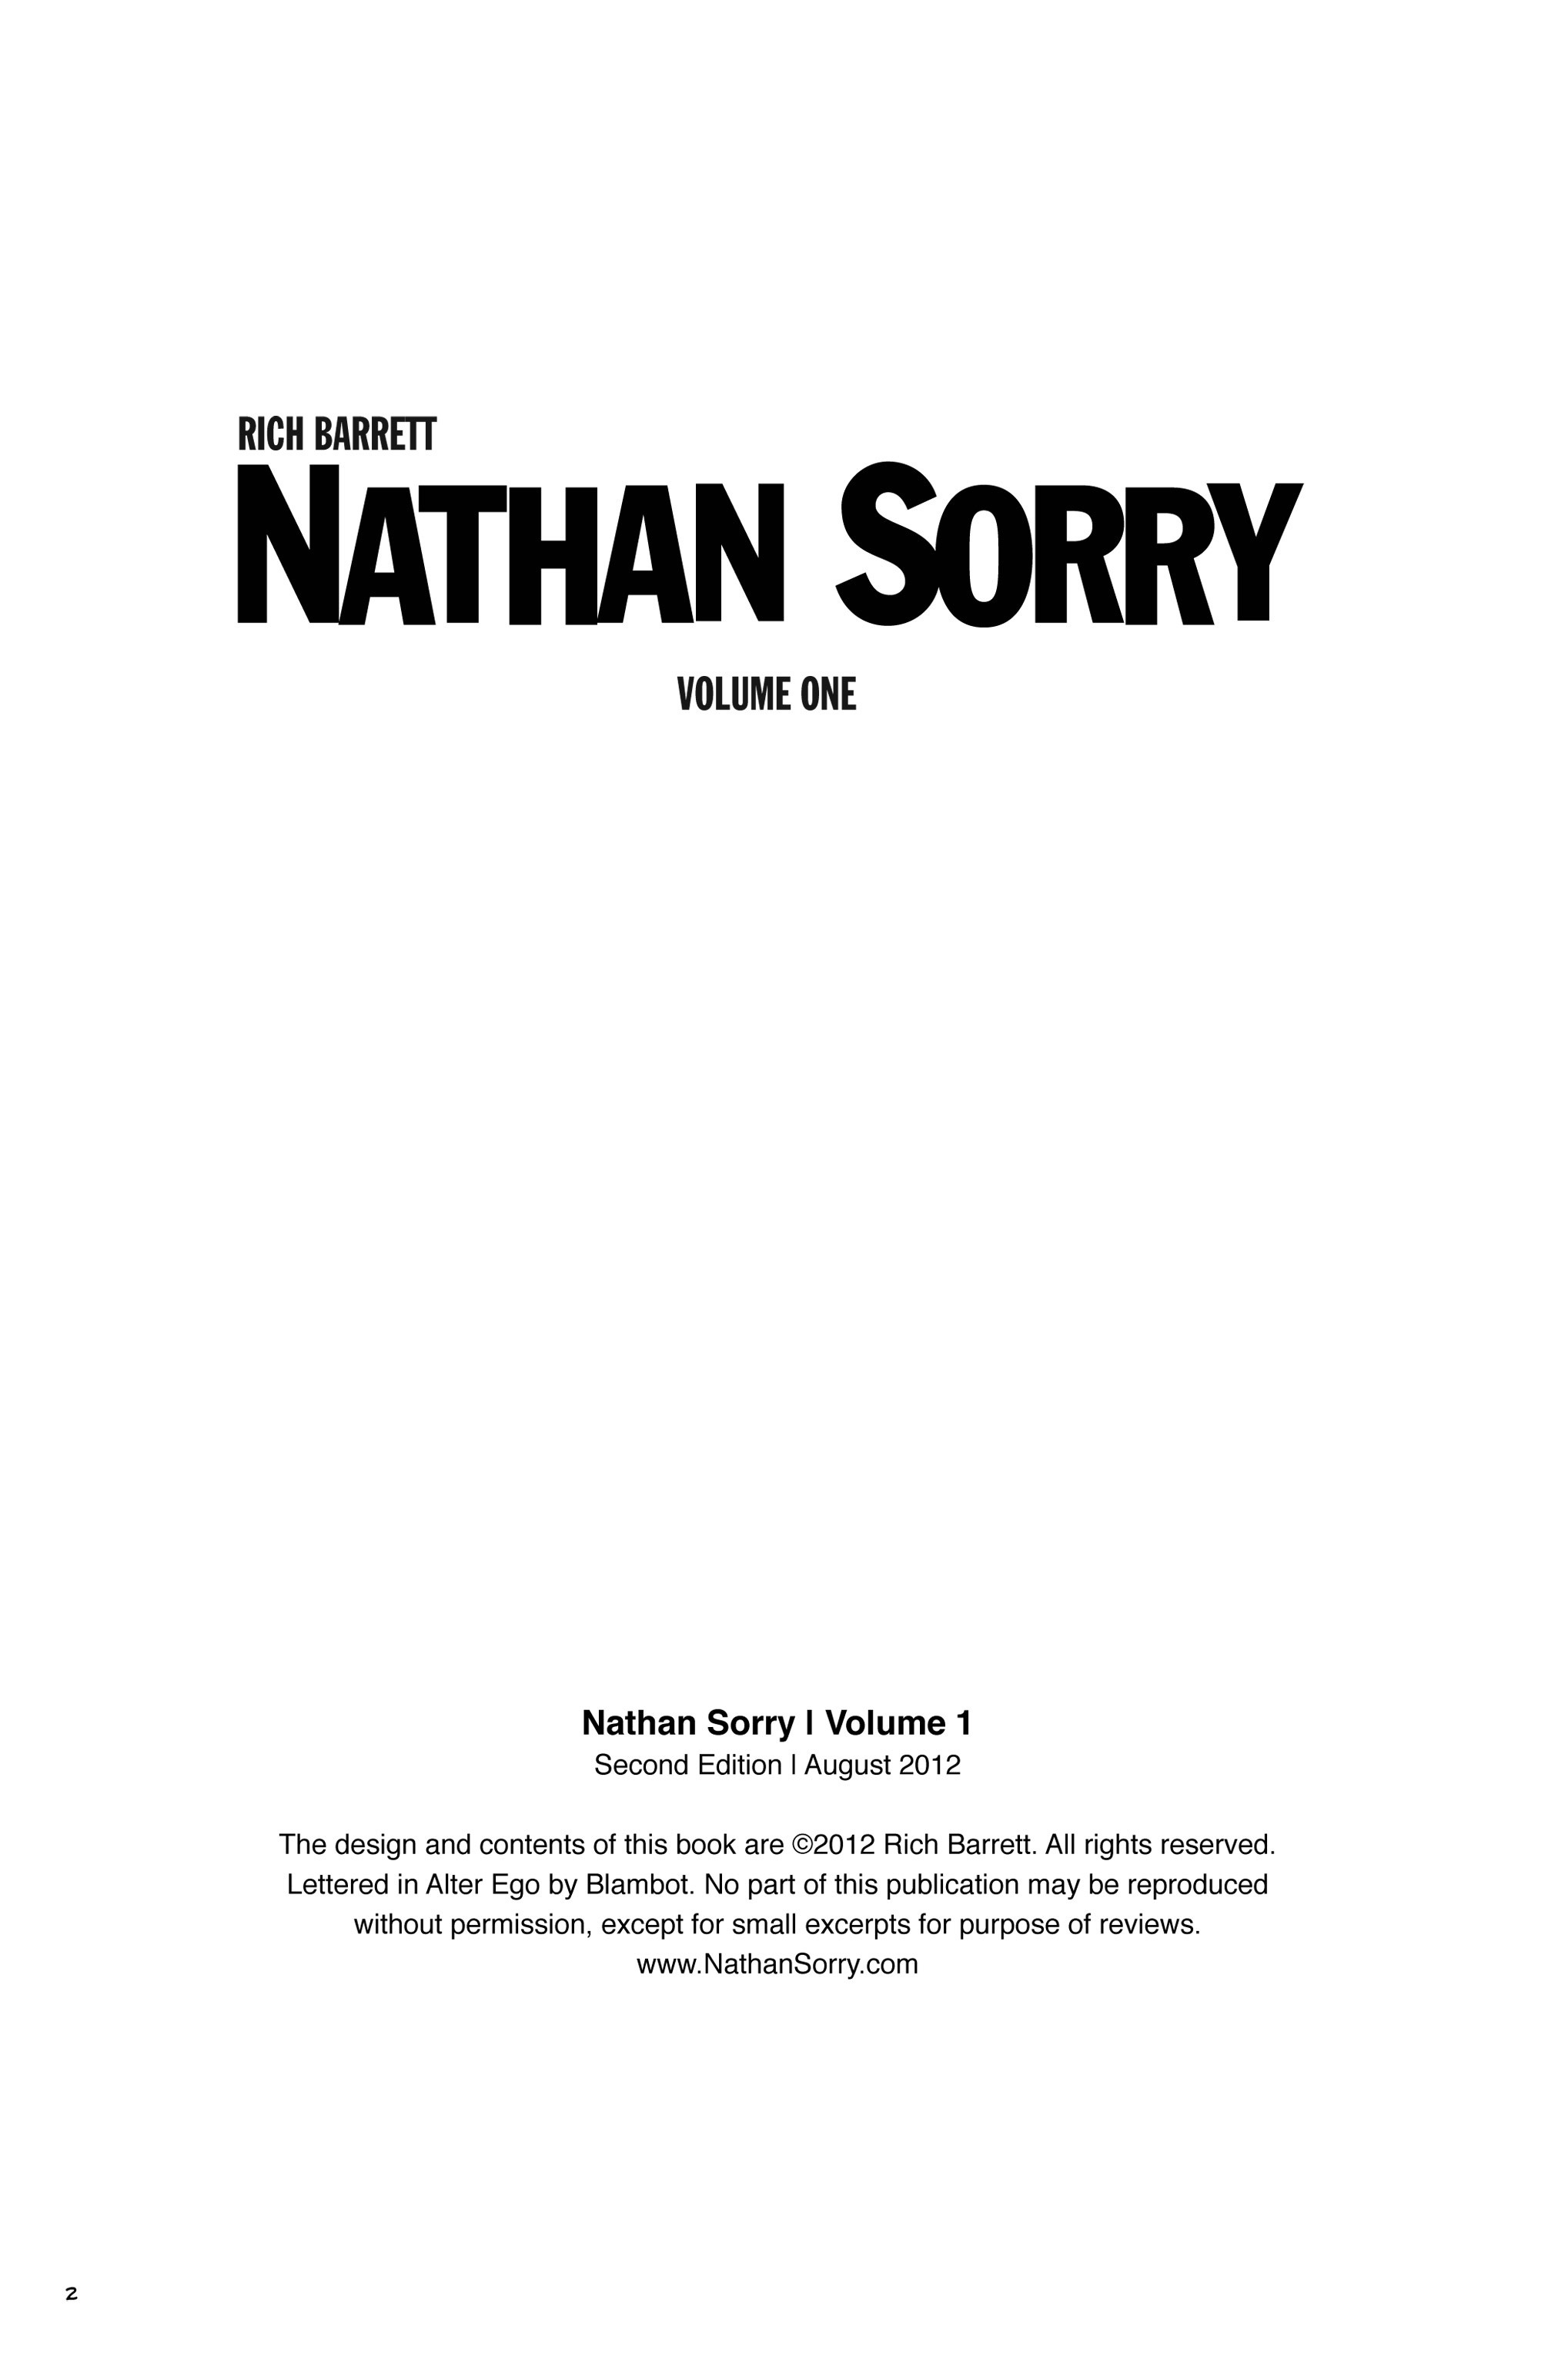 Read online Nathan Sorry comic -  Issue #1 - 2